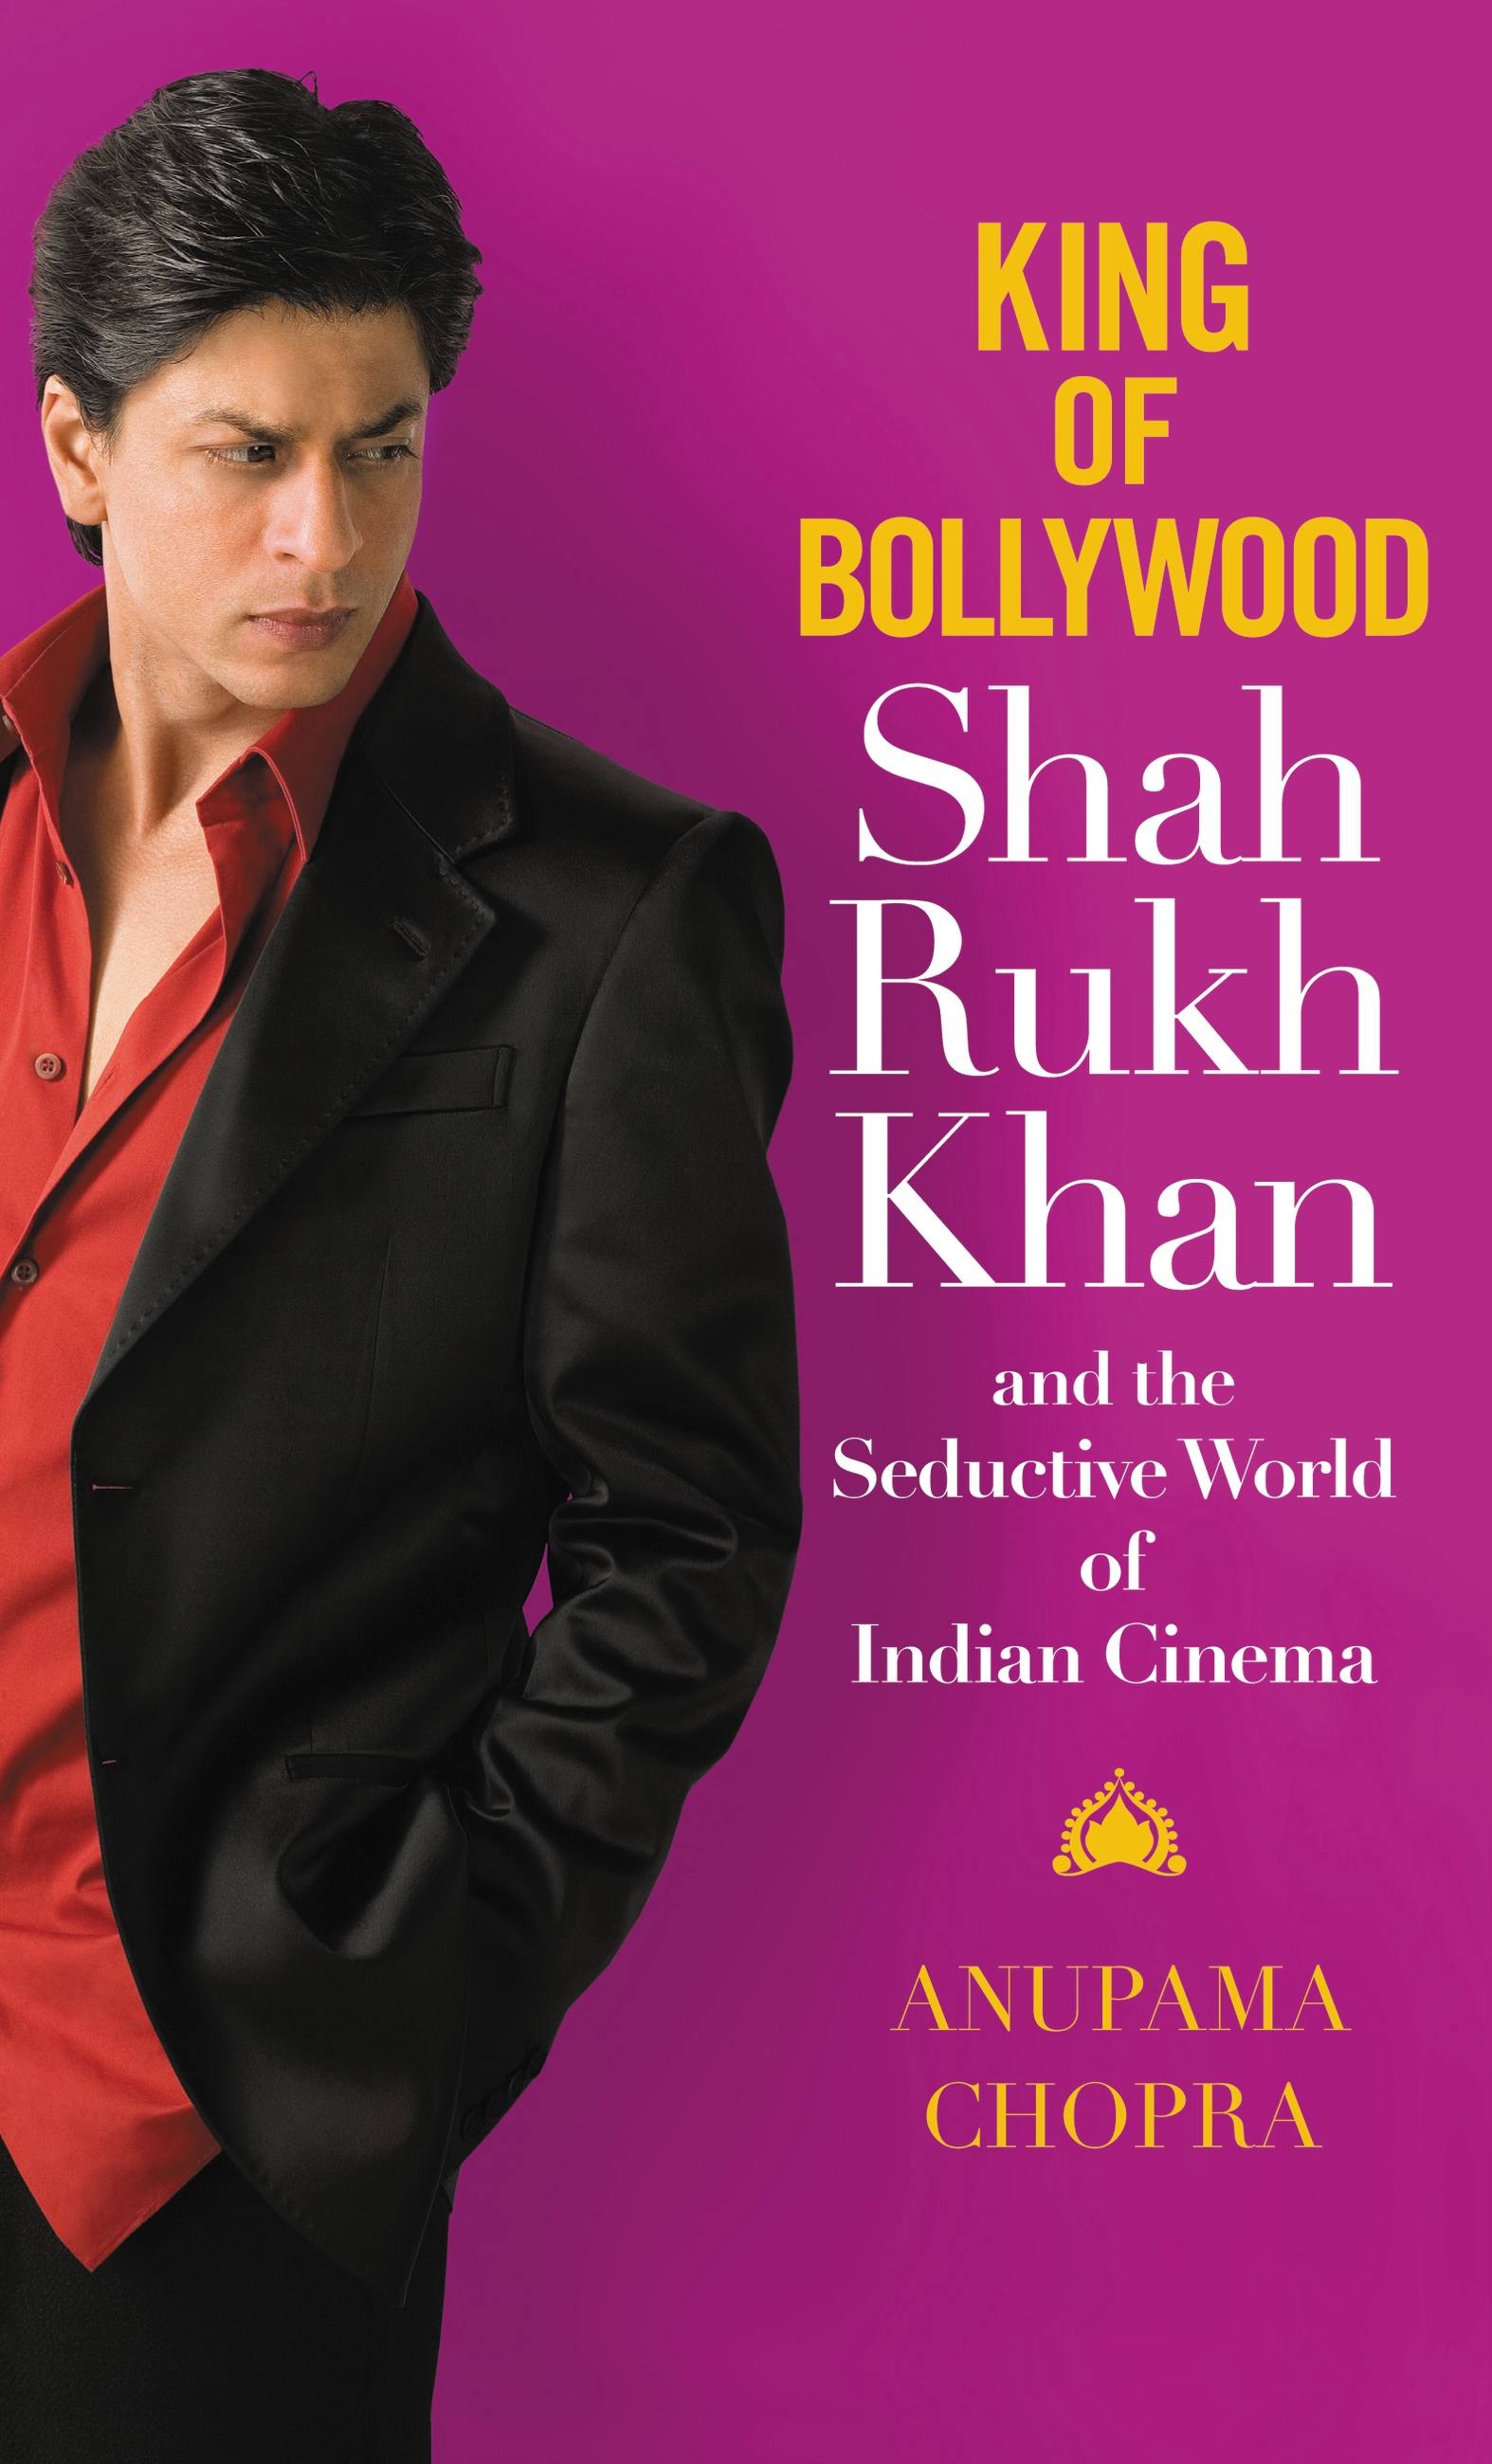 King of Bollywood by Anupama Chopra | Hachette Book Group